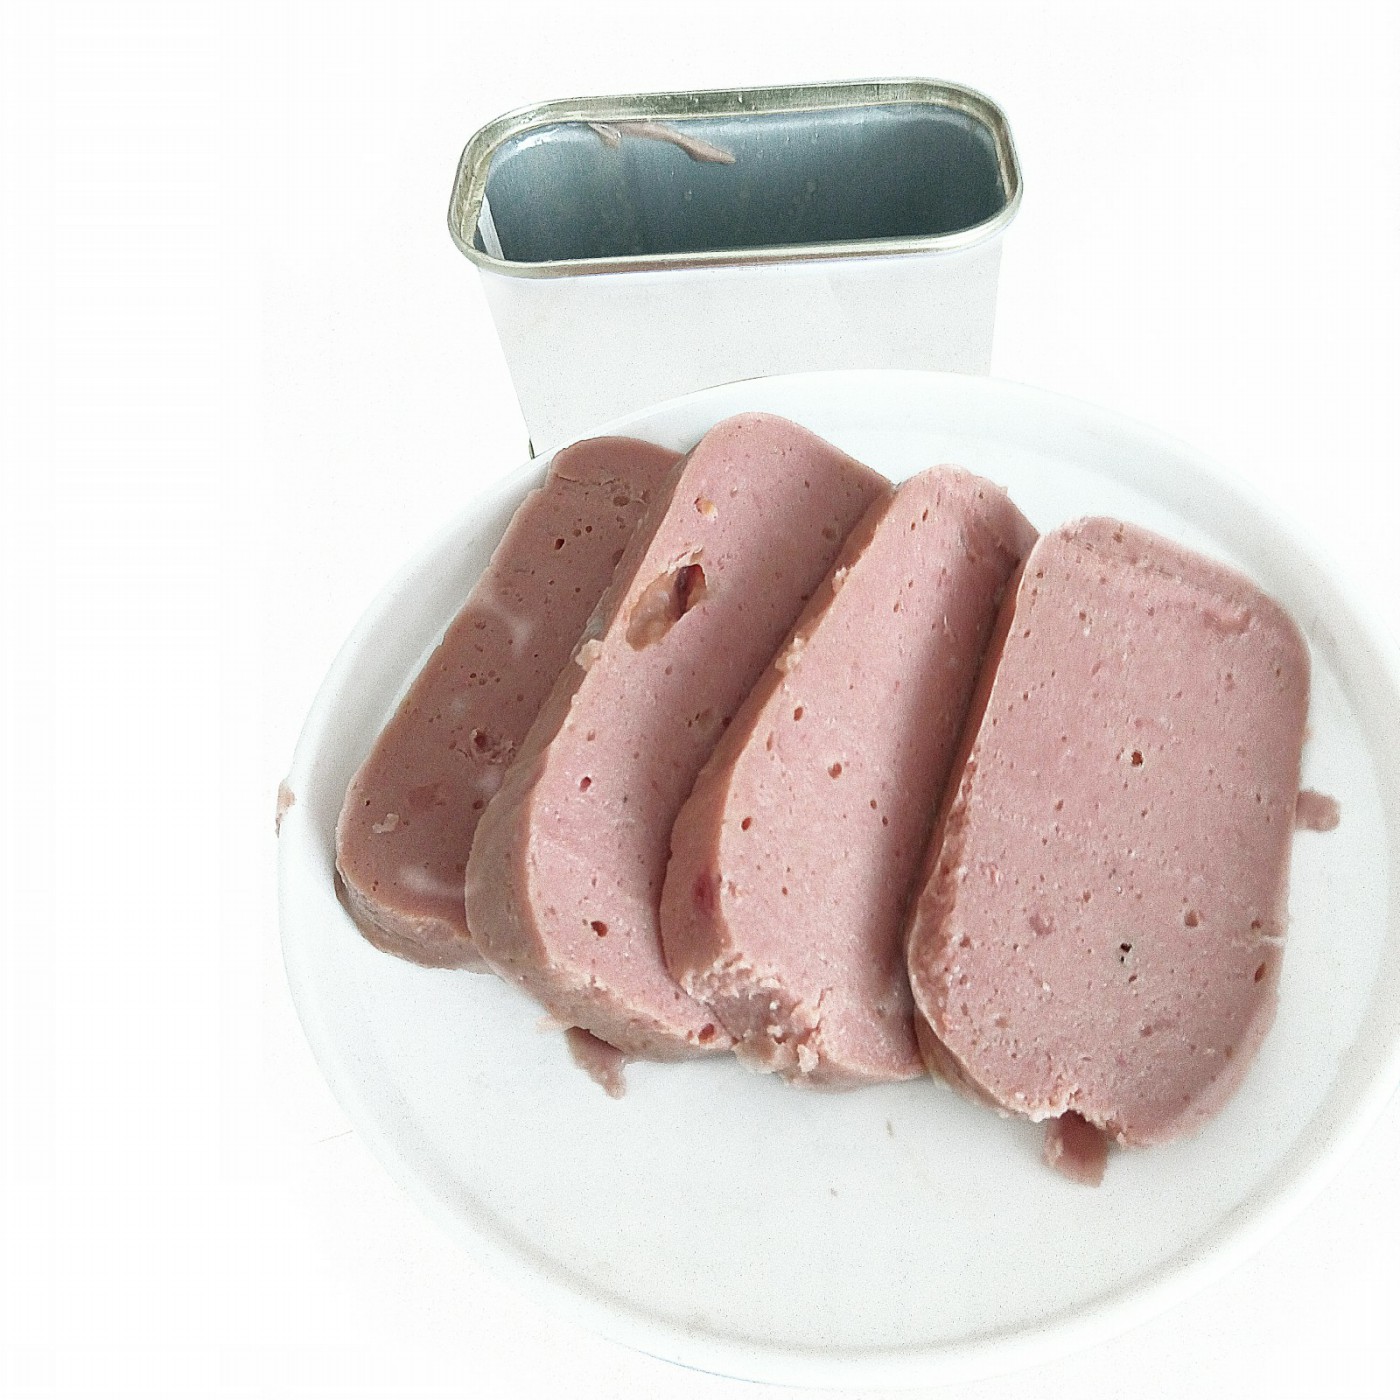 Canned beef luncheon meat